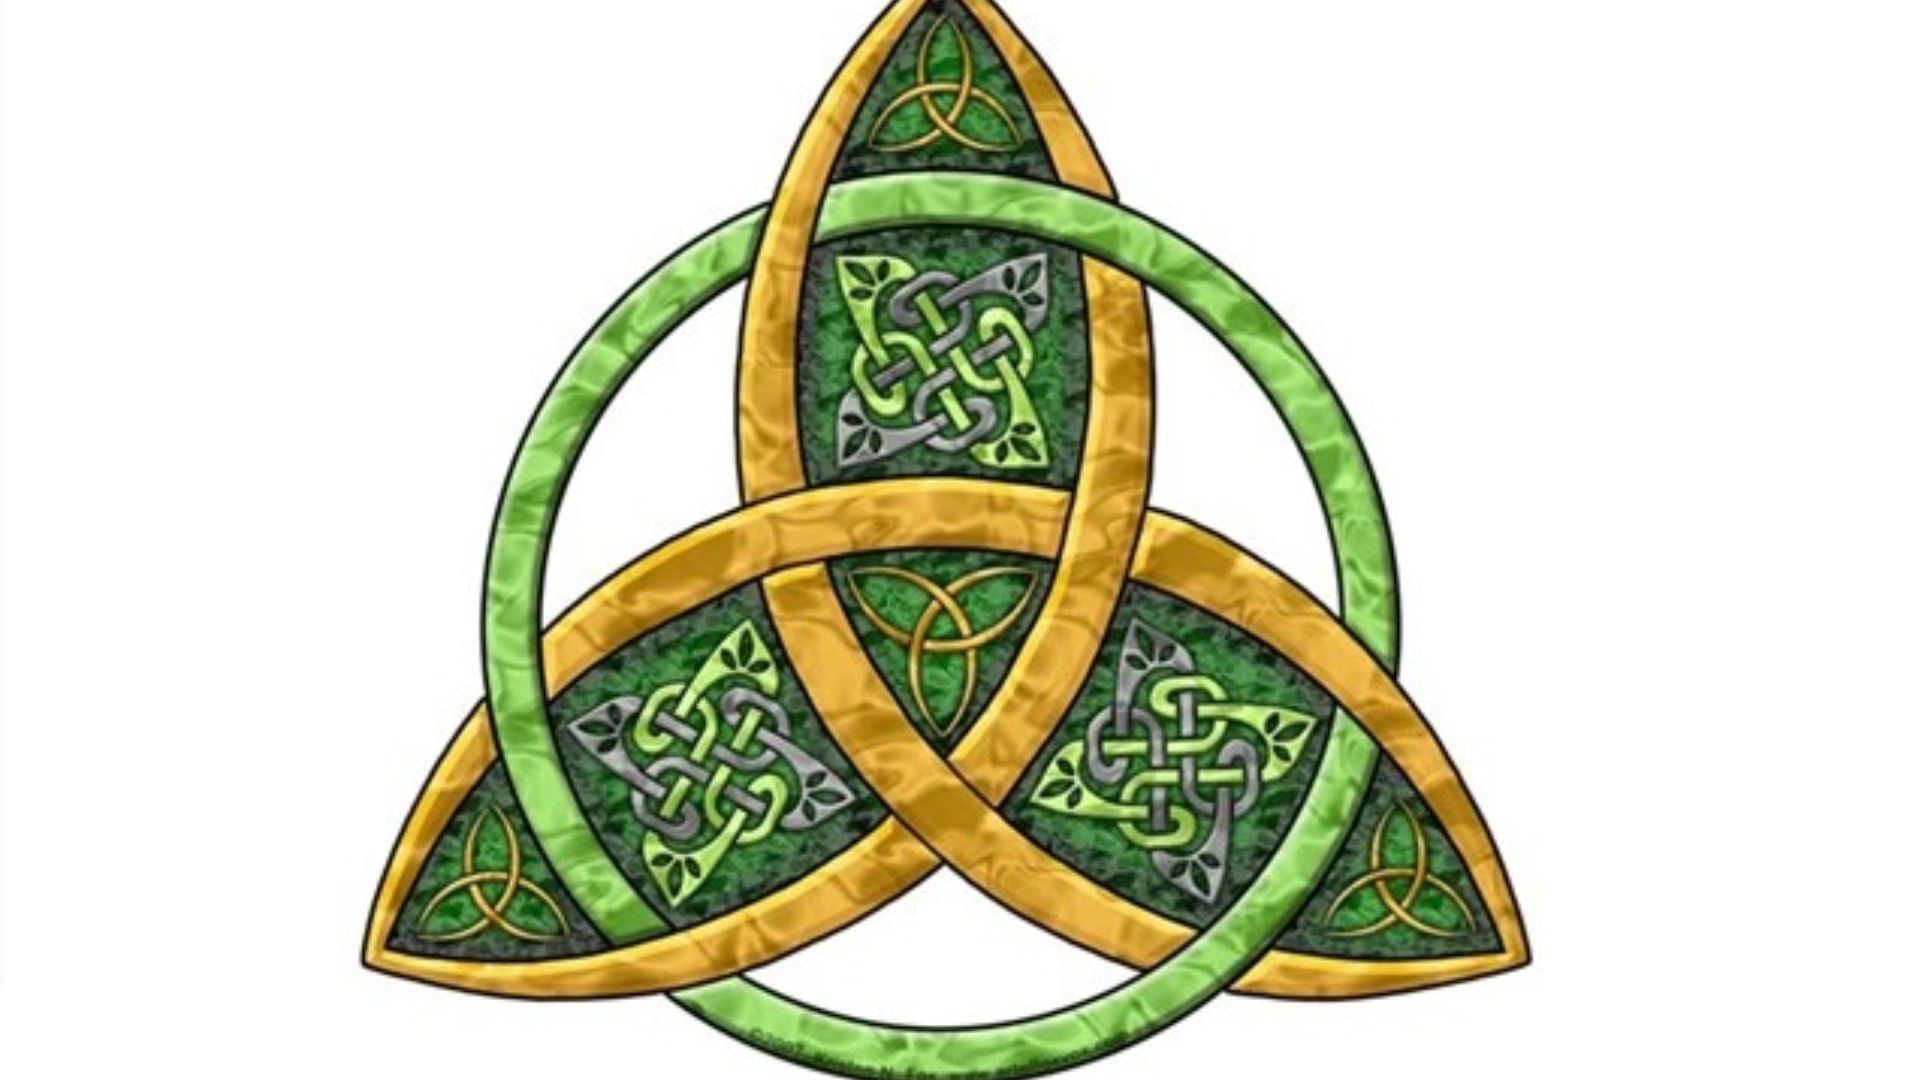 Triquetra Meaning - Understanding The Symbolism Of The Three-Pointed Knot